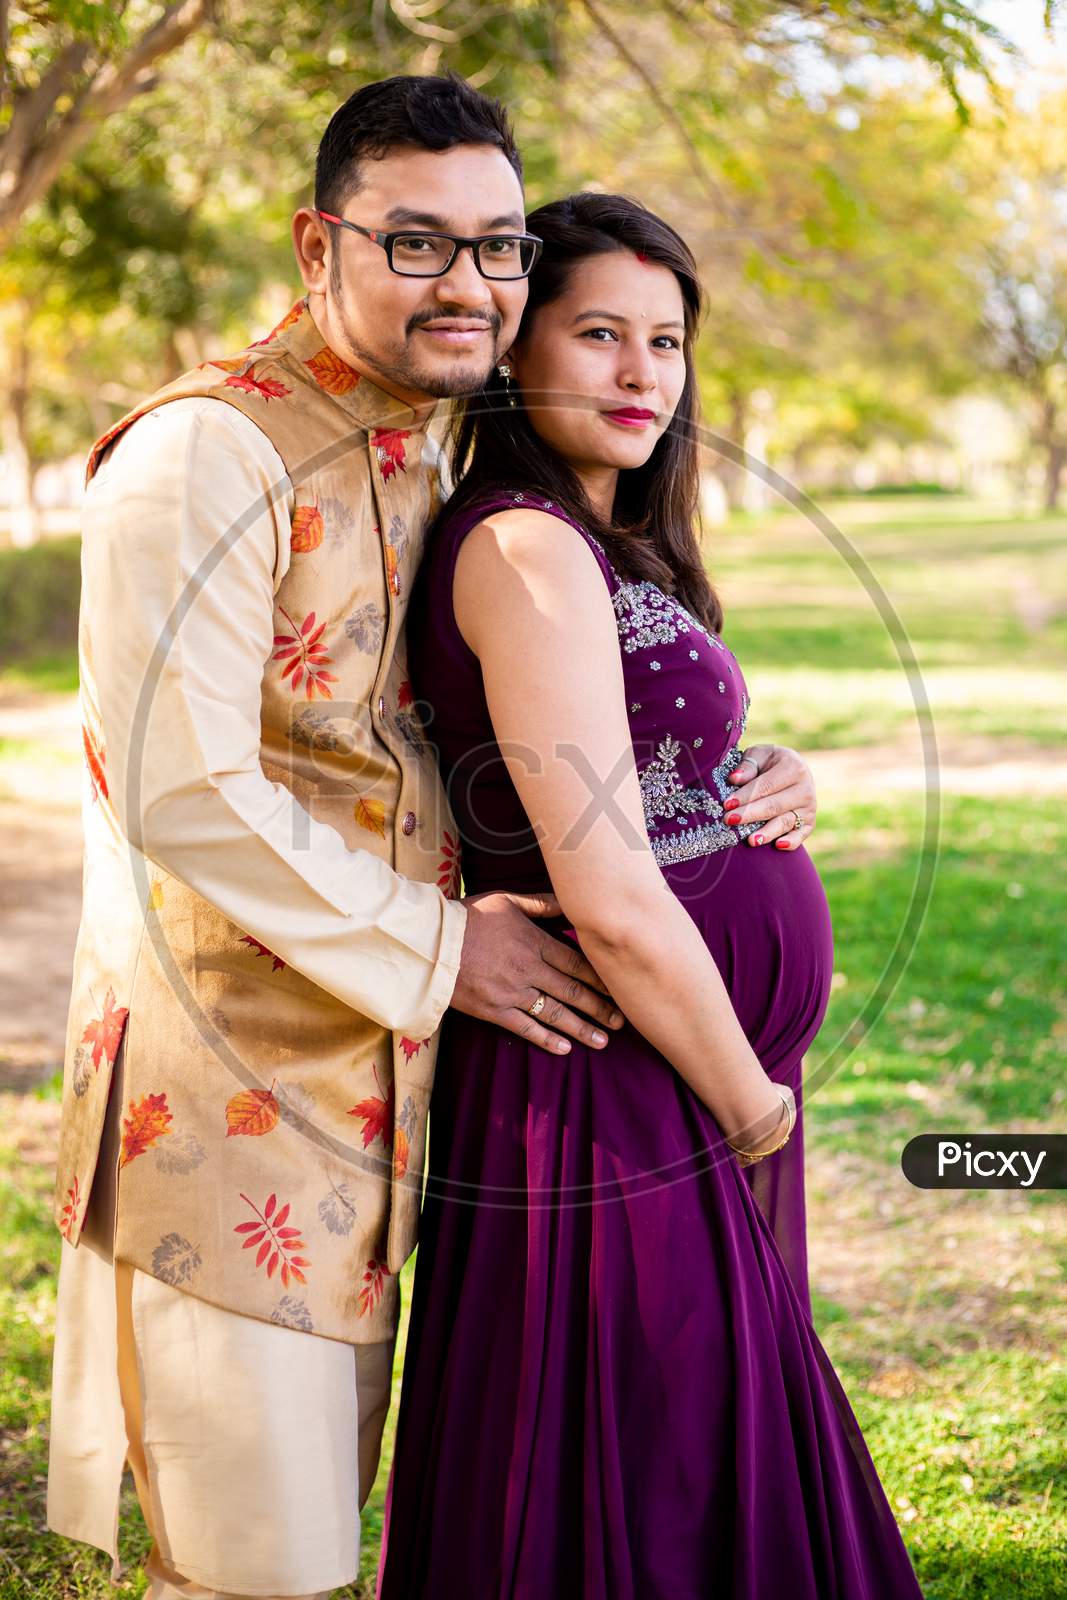 Young Asian Indian Pregnant Woman With Her Husband Wearing Traditional Outfit Standing In Park Or Garden